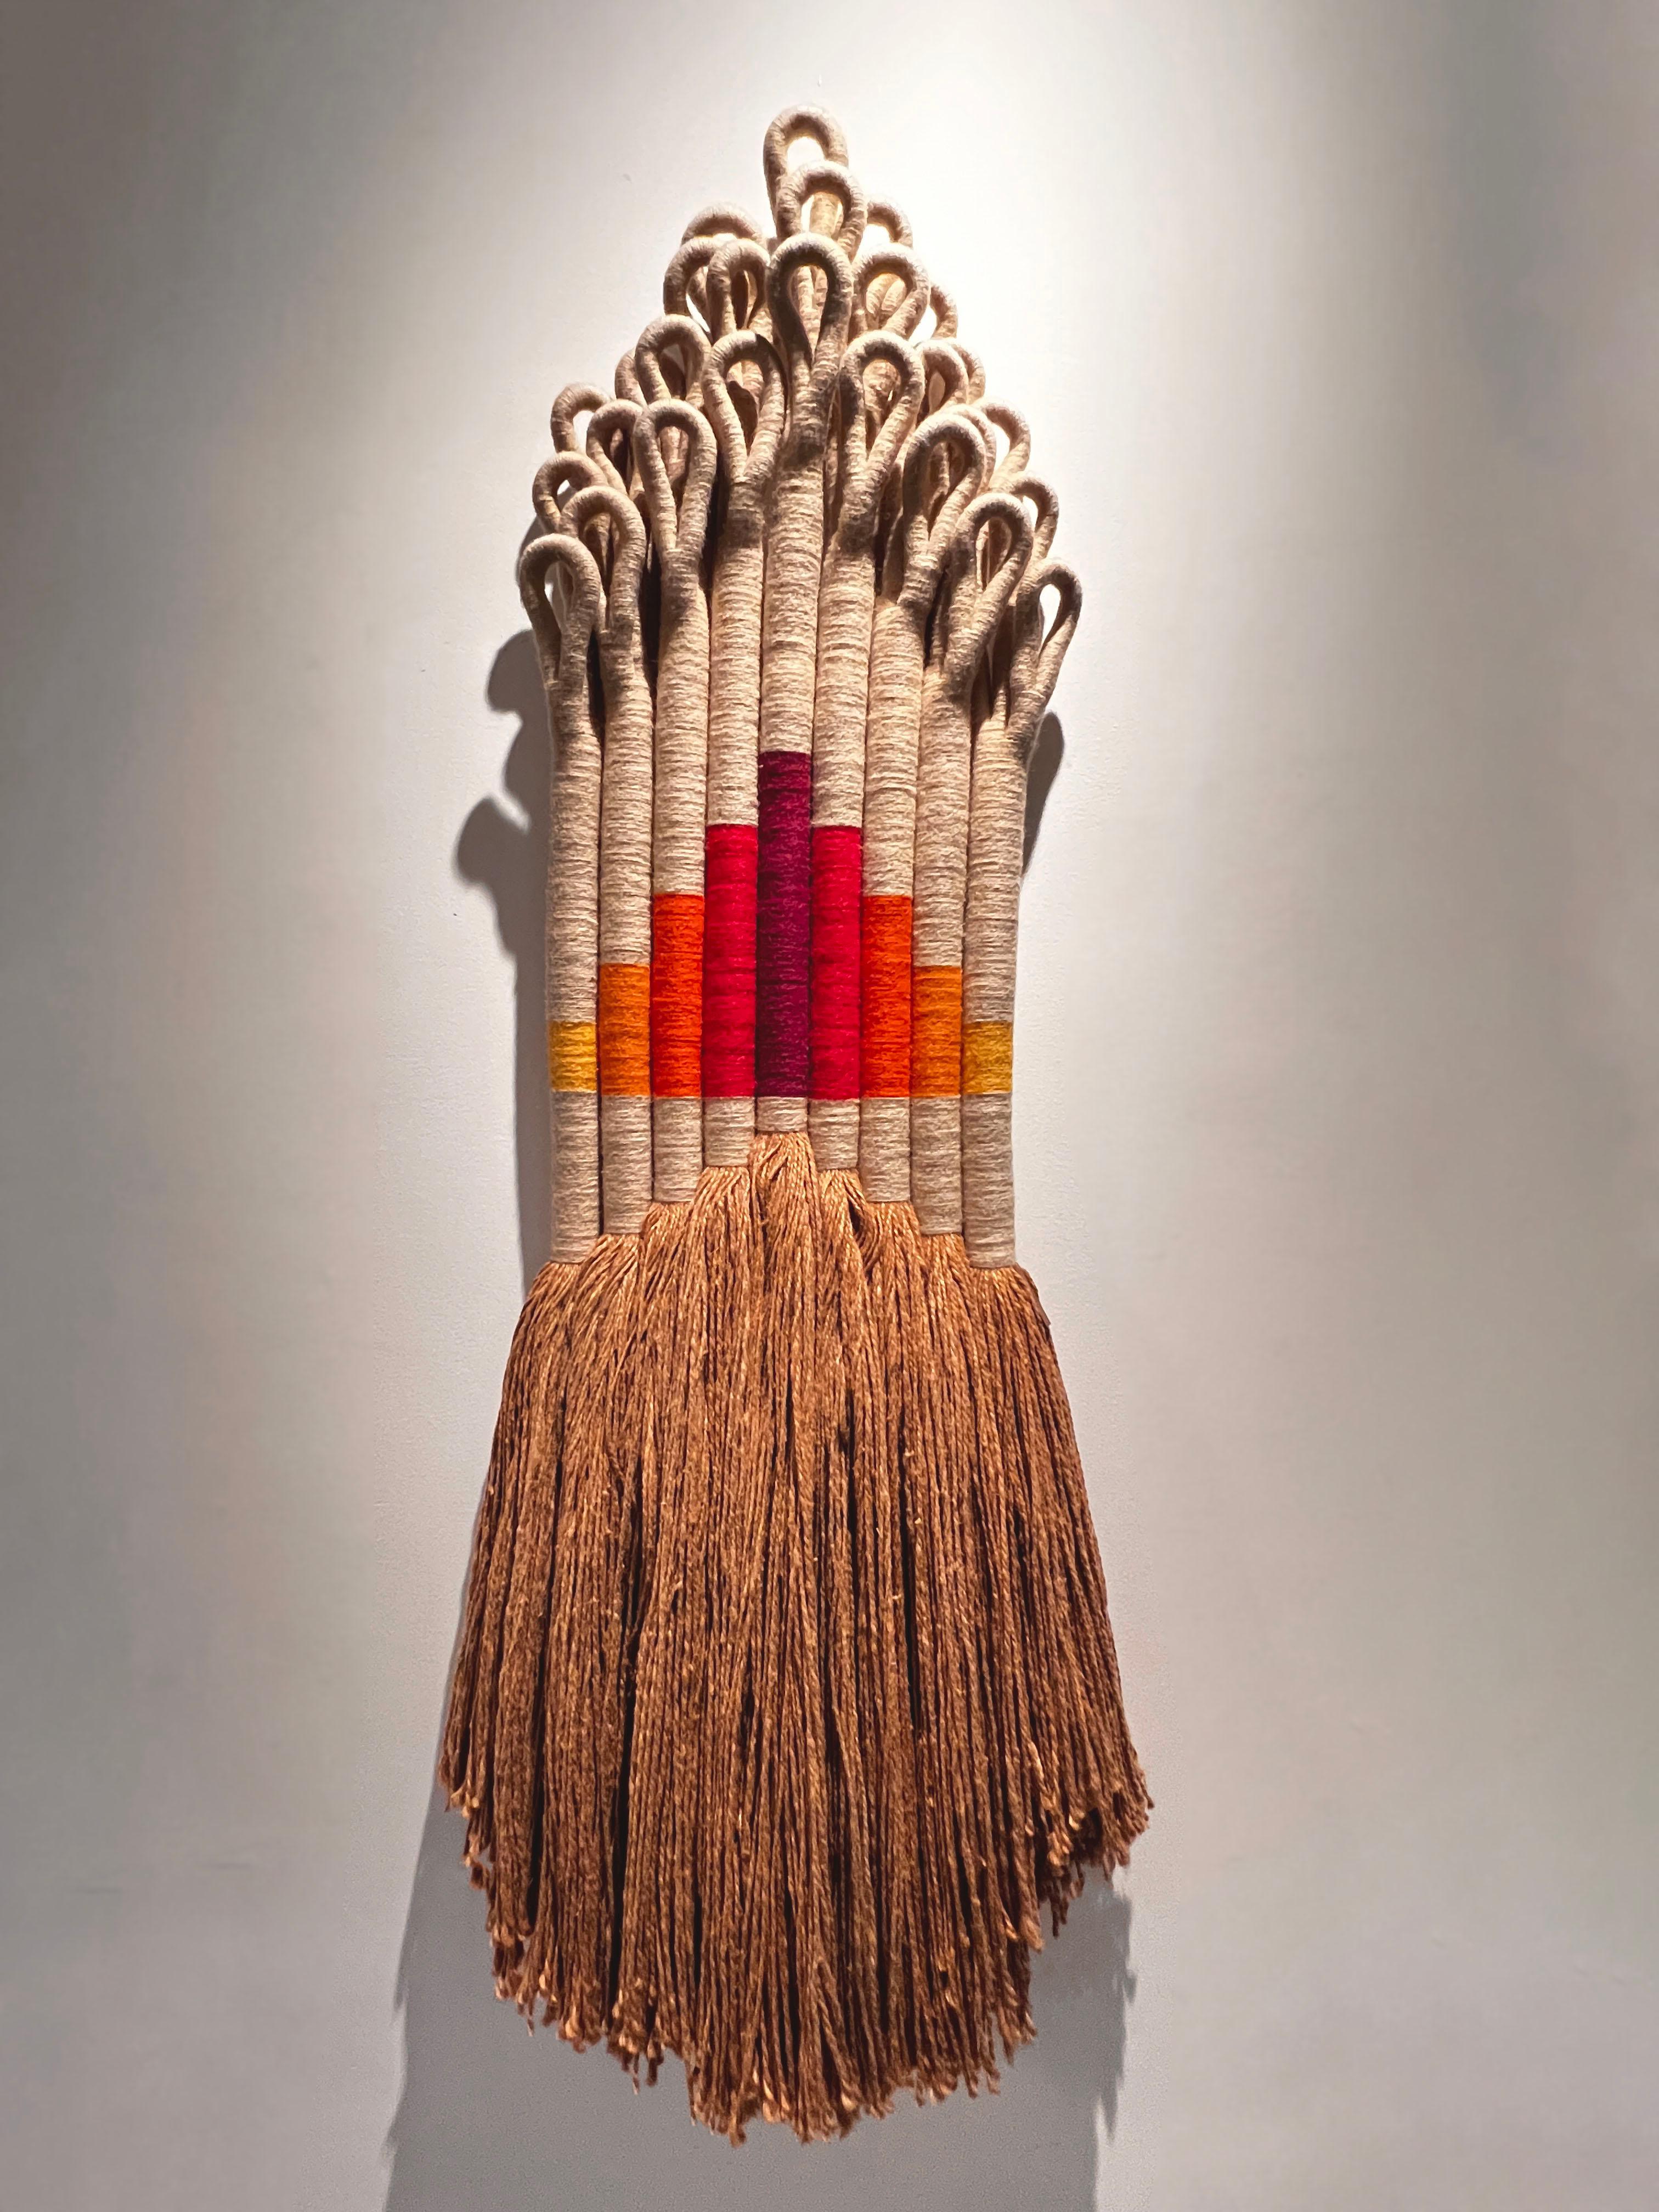 Textile installation by fiber artist Jane Knight titled 'Ziggurat'. This work is comprised of 9 vertical elements with multiple loops at the top. It is signed with an embossed copper plaque. Each element consists of hundreds of raw strands of jute